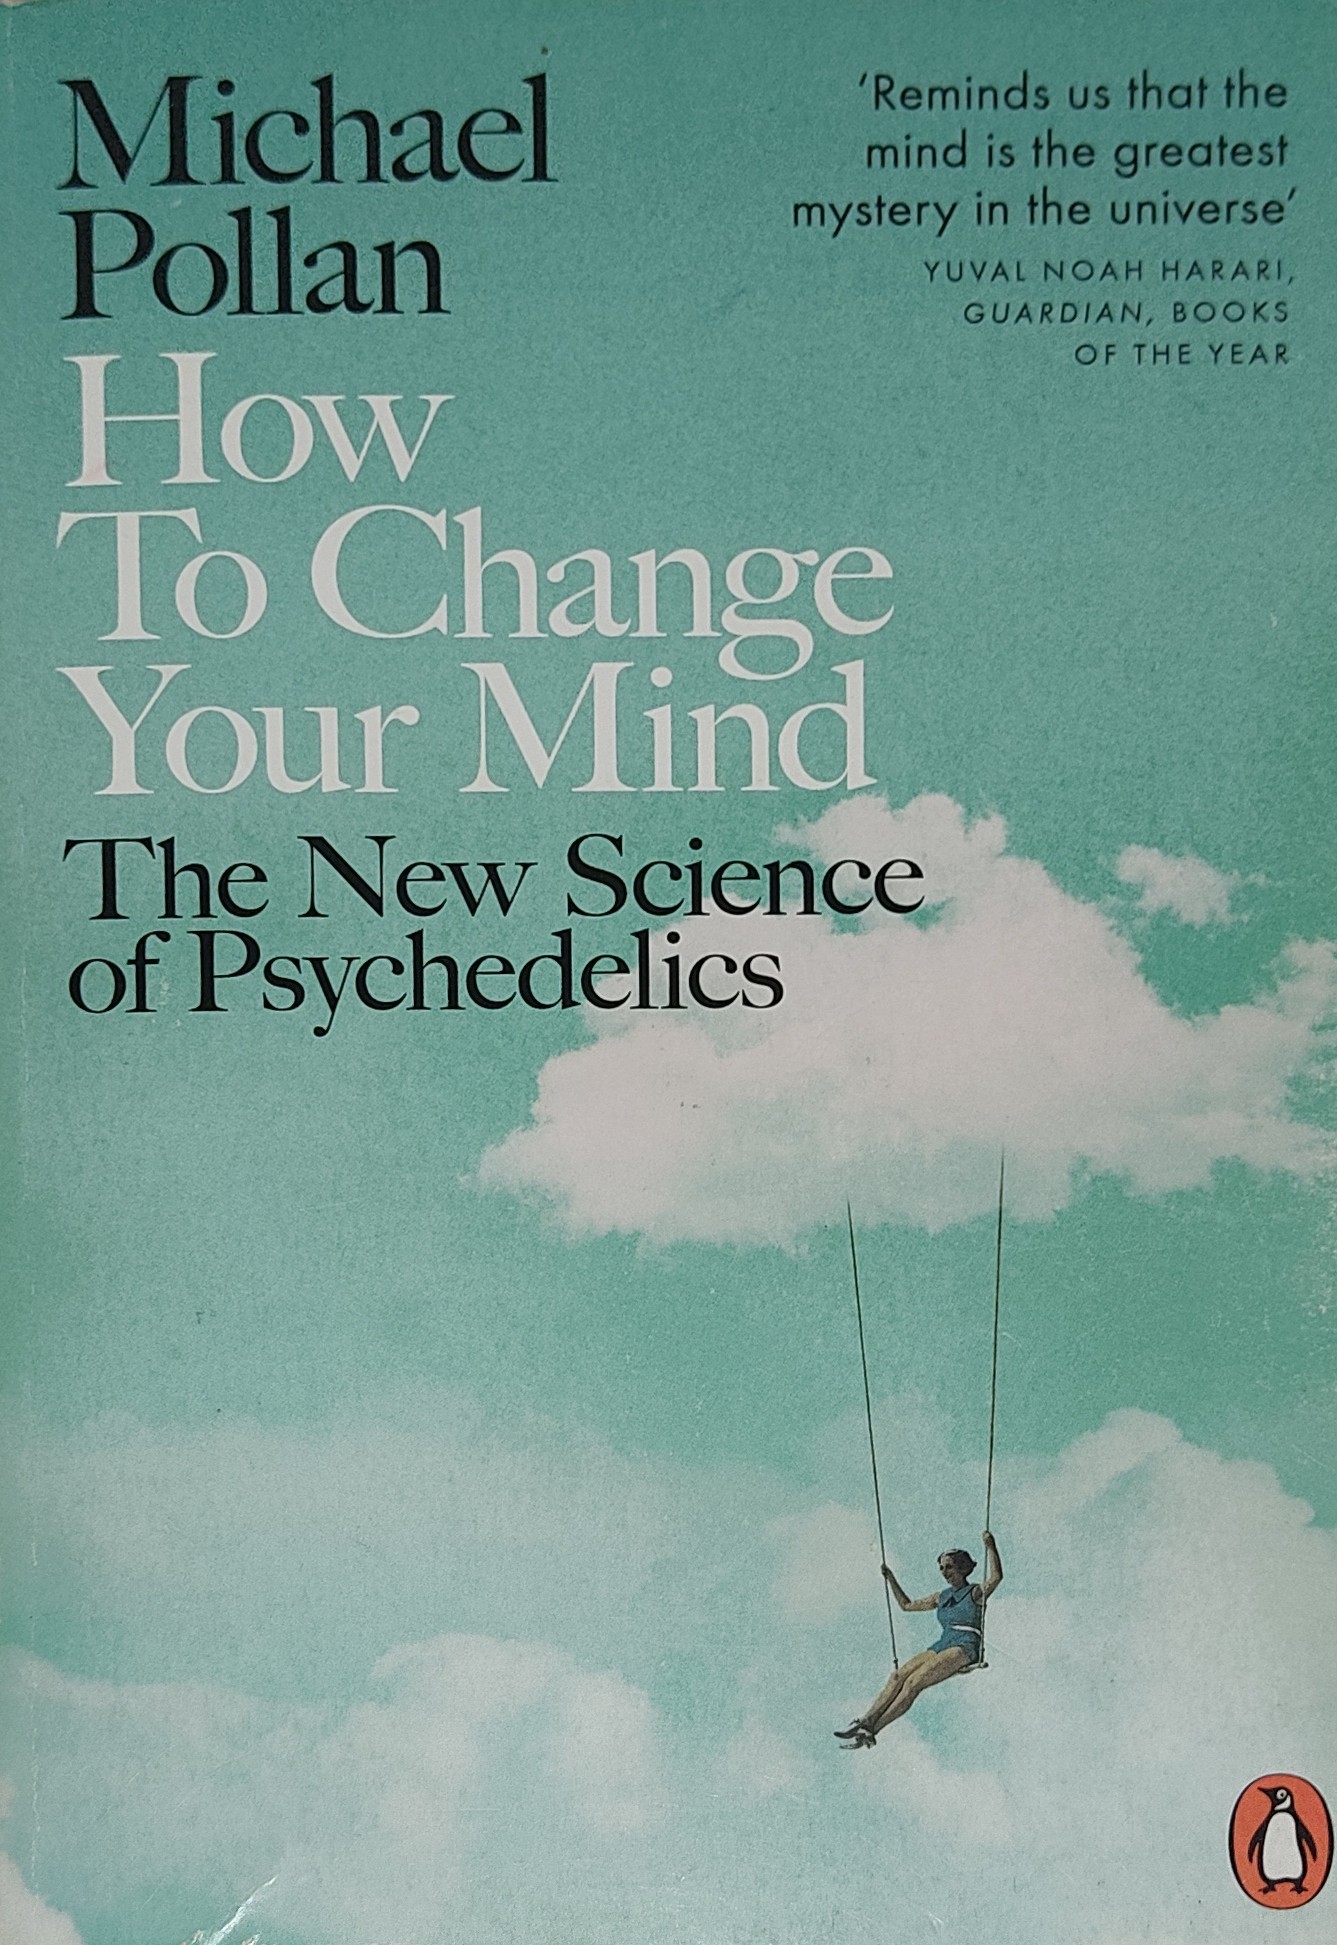 Michael Pollan: How to Change Your Mind (2019, Penguin Books, Limited)